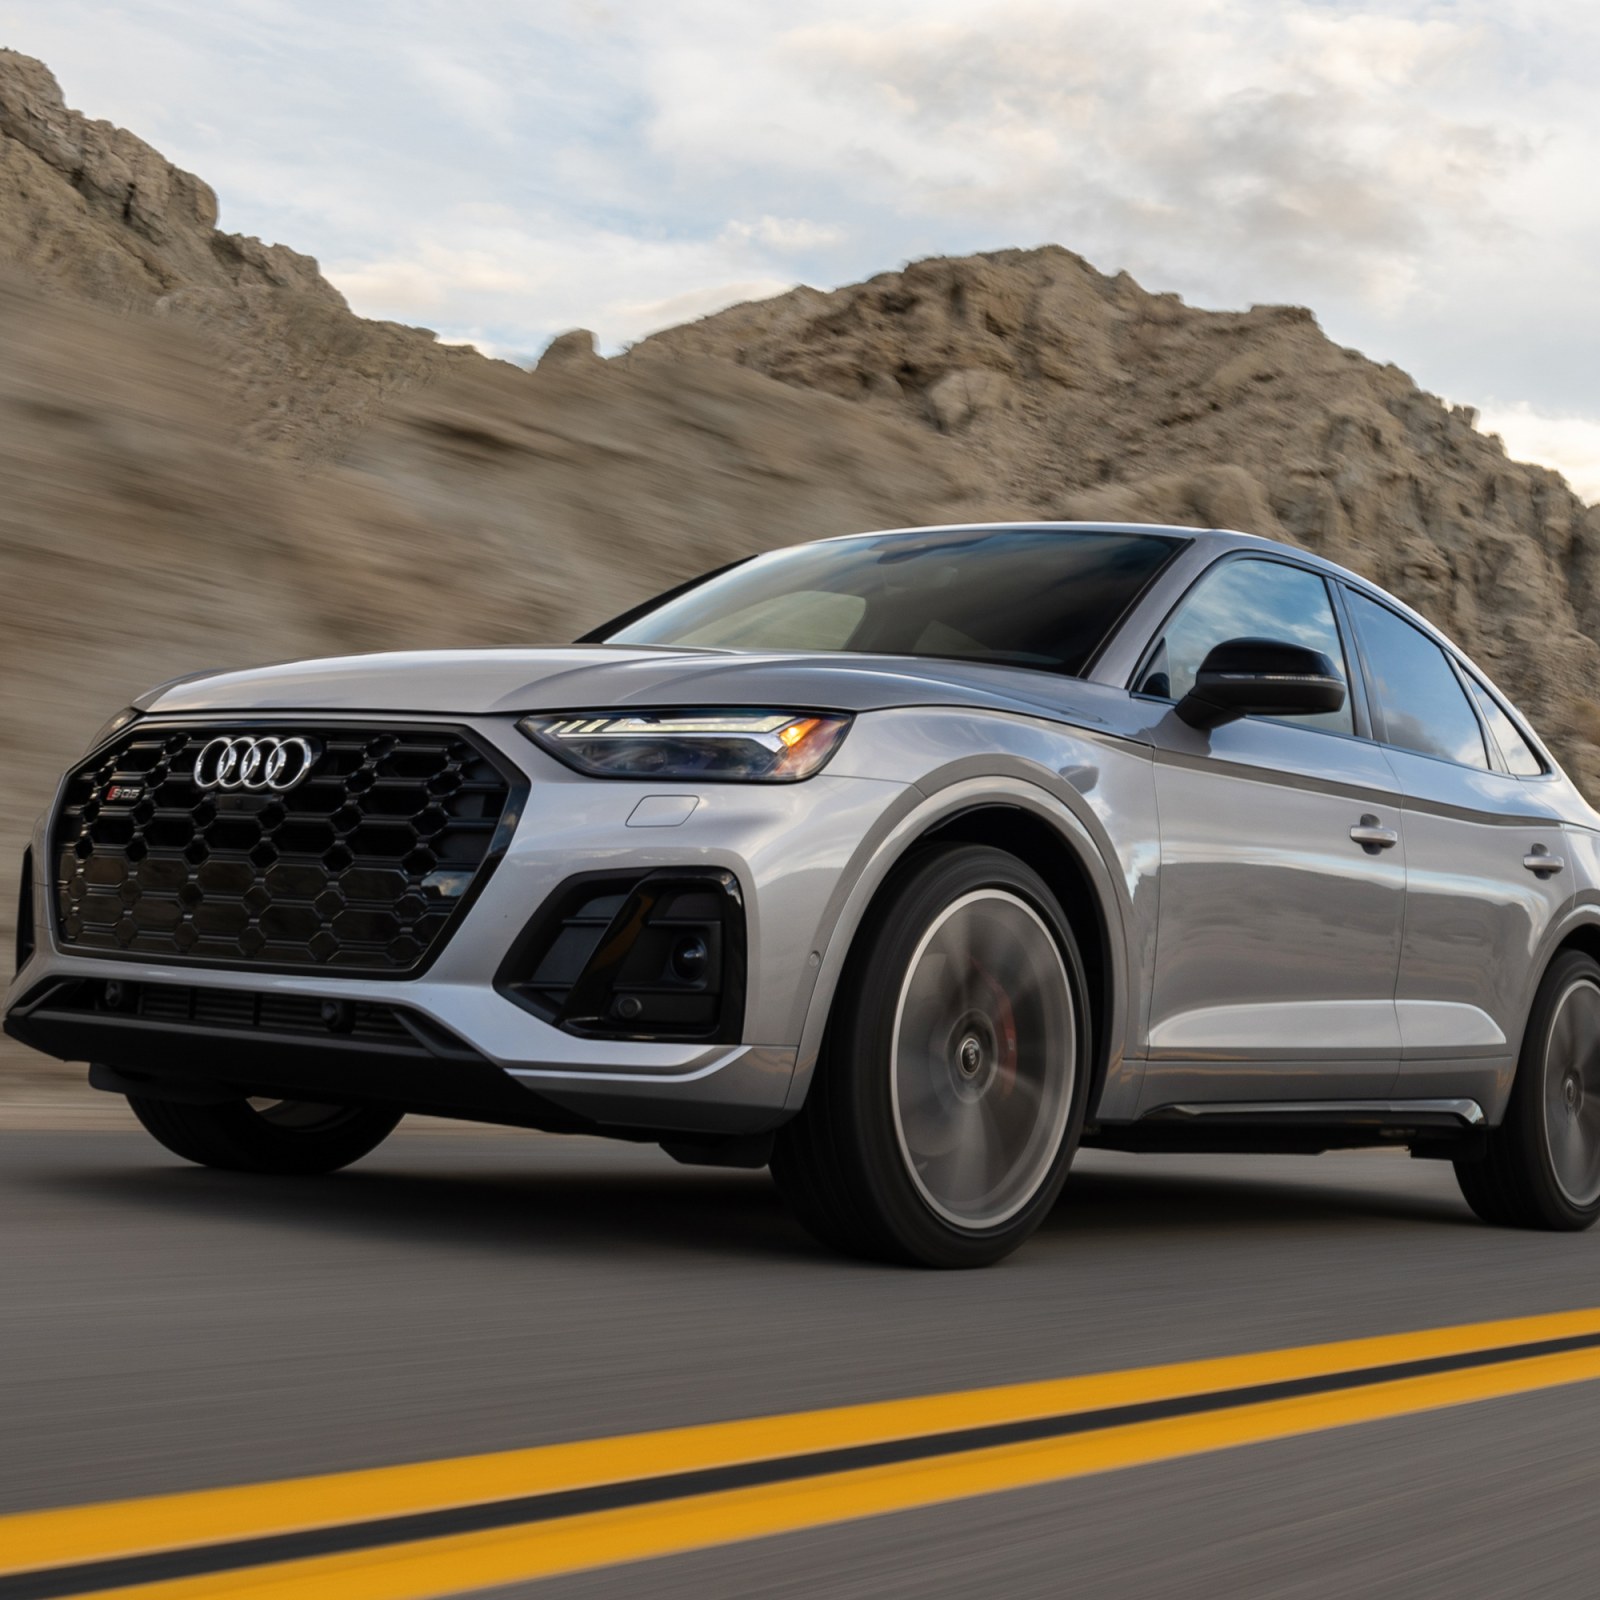 2023 Audi SQ5 Review: Quick and Competent No Matter the Weather